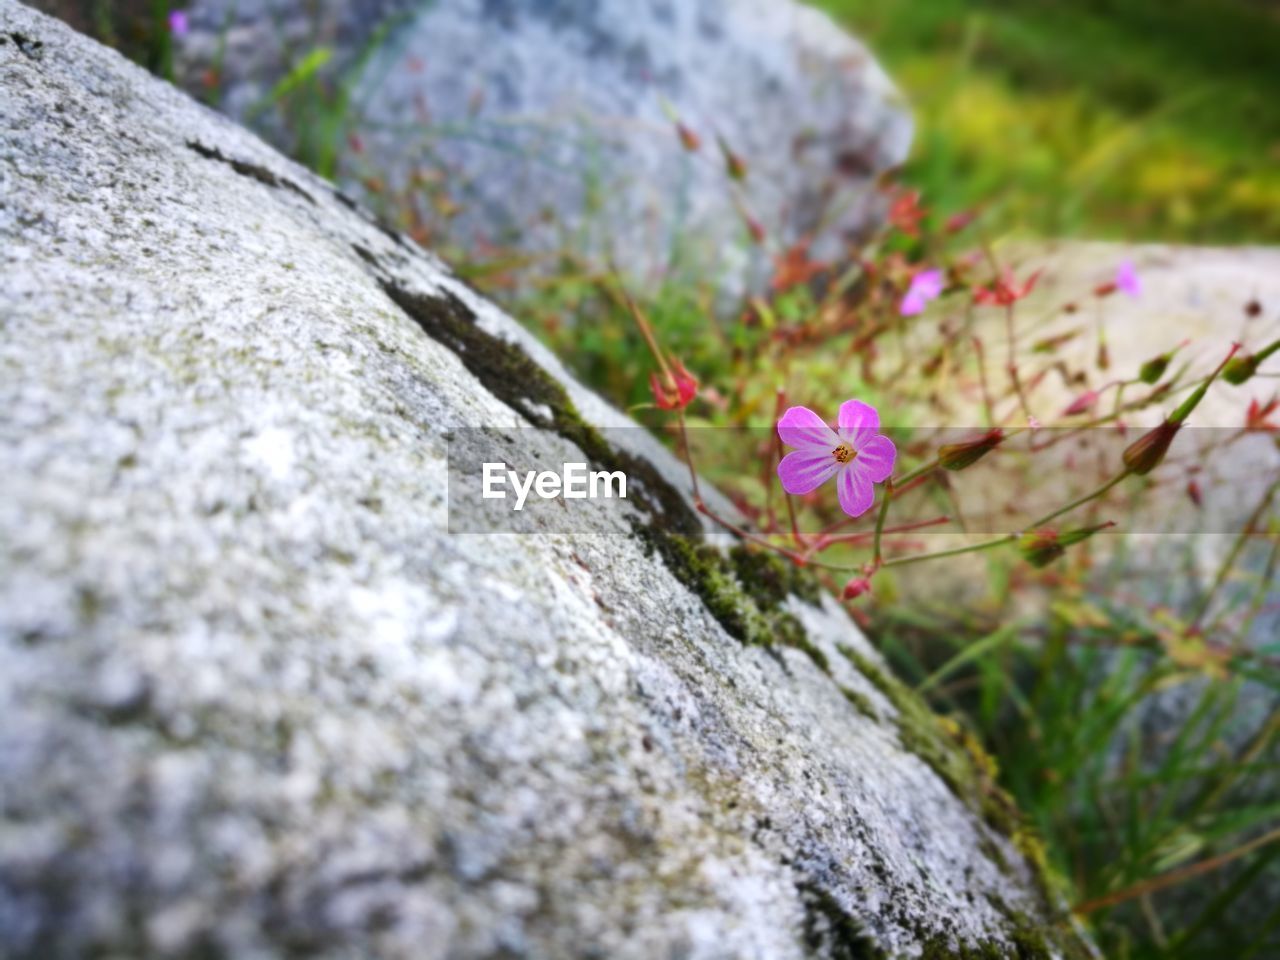 CLOSE-UP OF FLOWERS GROWING ON ROCK